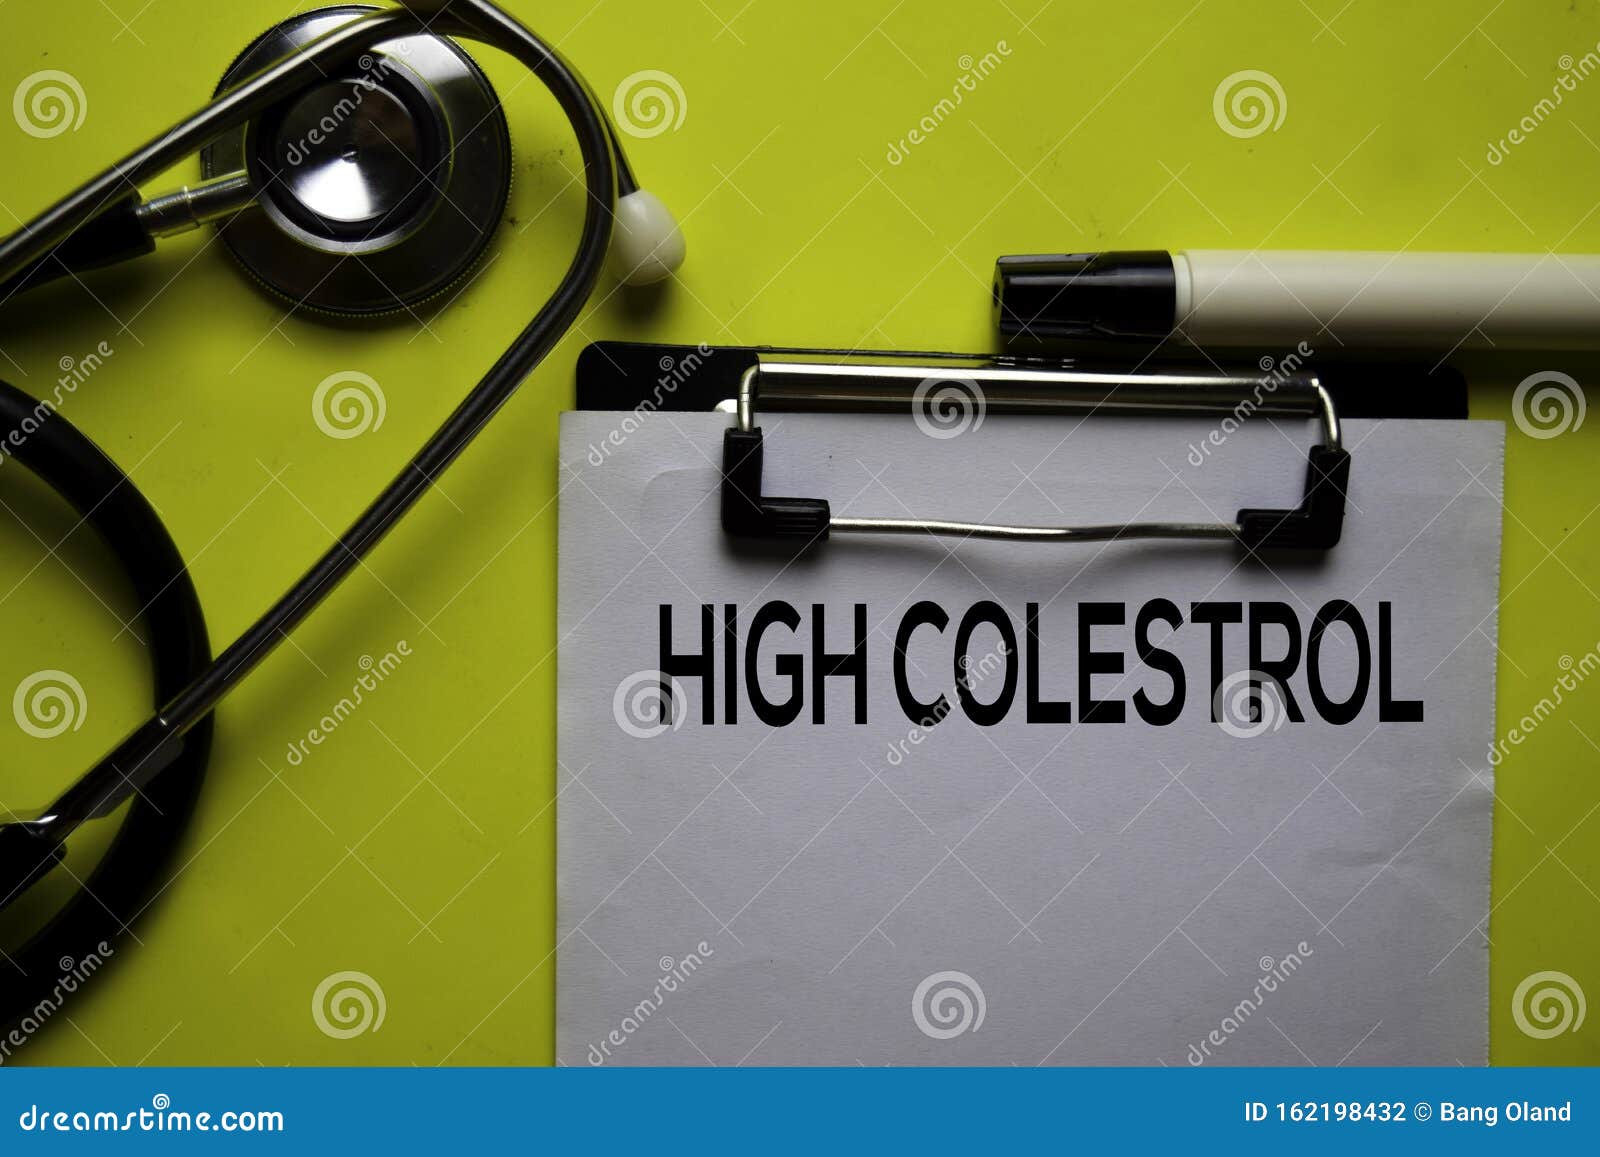 high colesterol on the sticky notes with yellow background. healthcare or medical concept